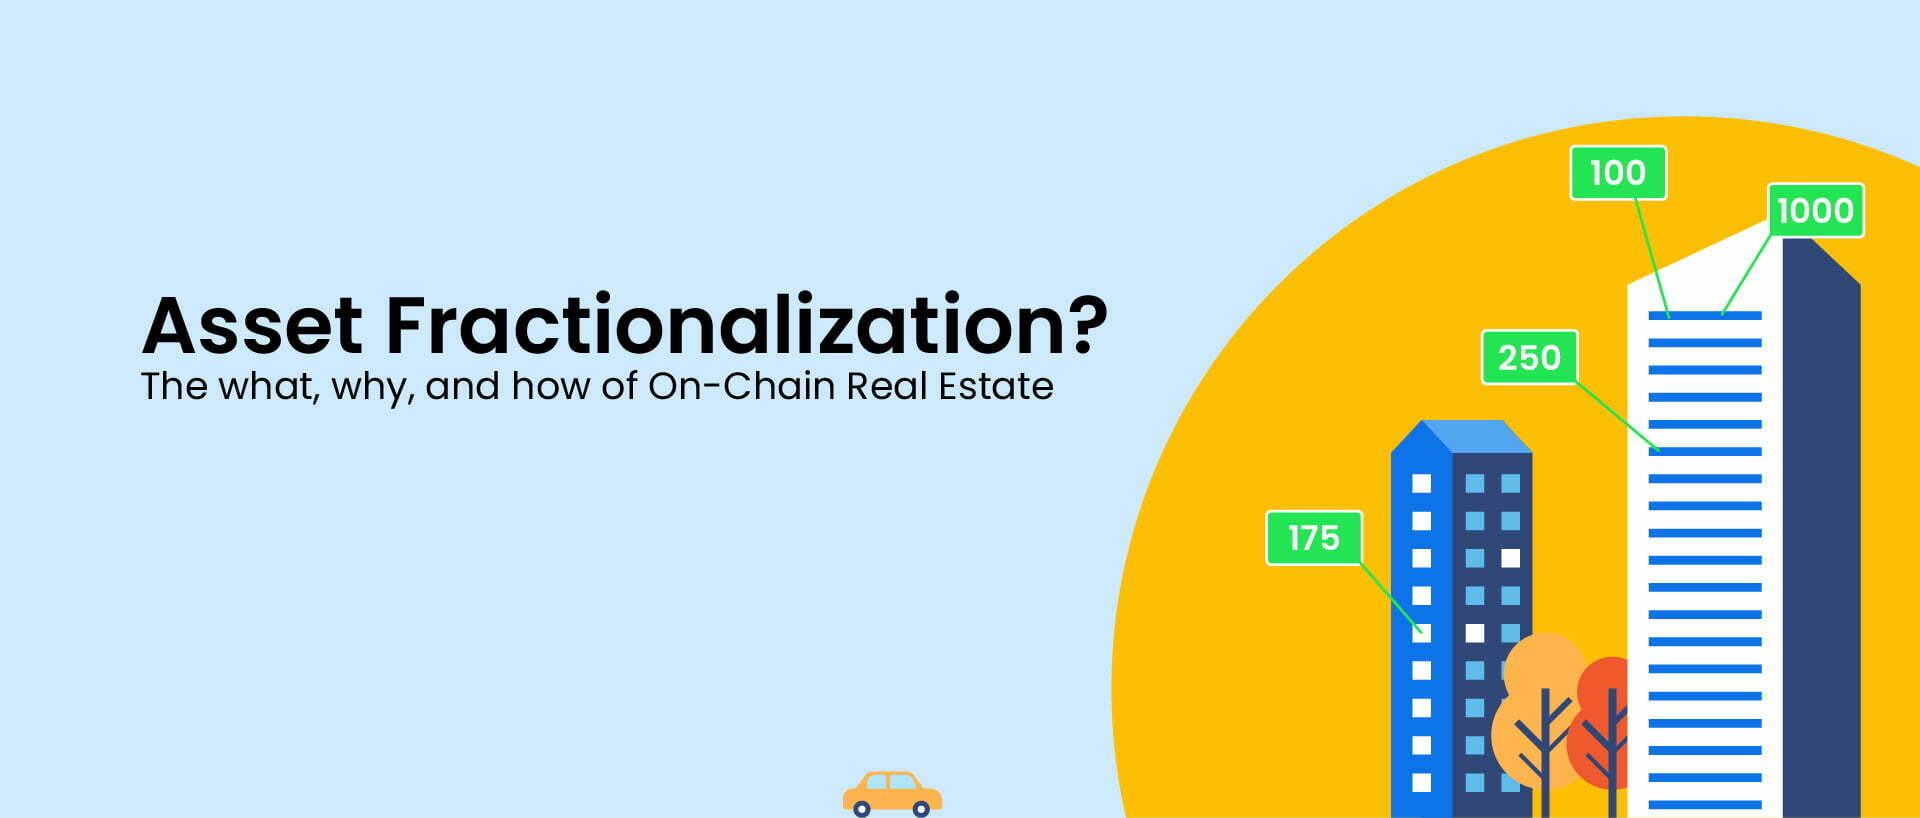 Asset Fractionalisation? The what, why, and how of On-Chain Real Estate